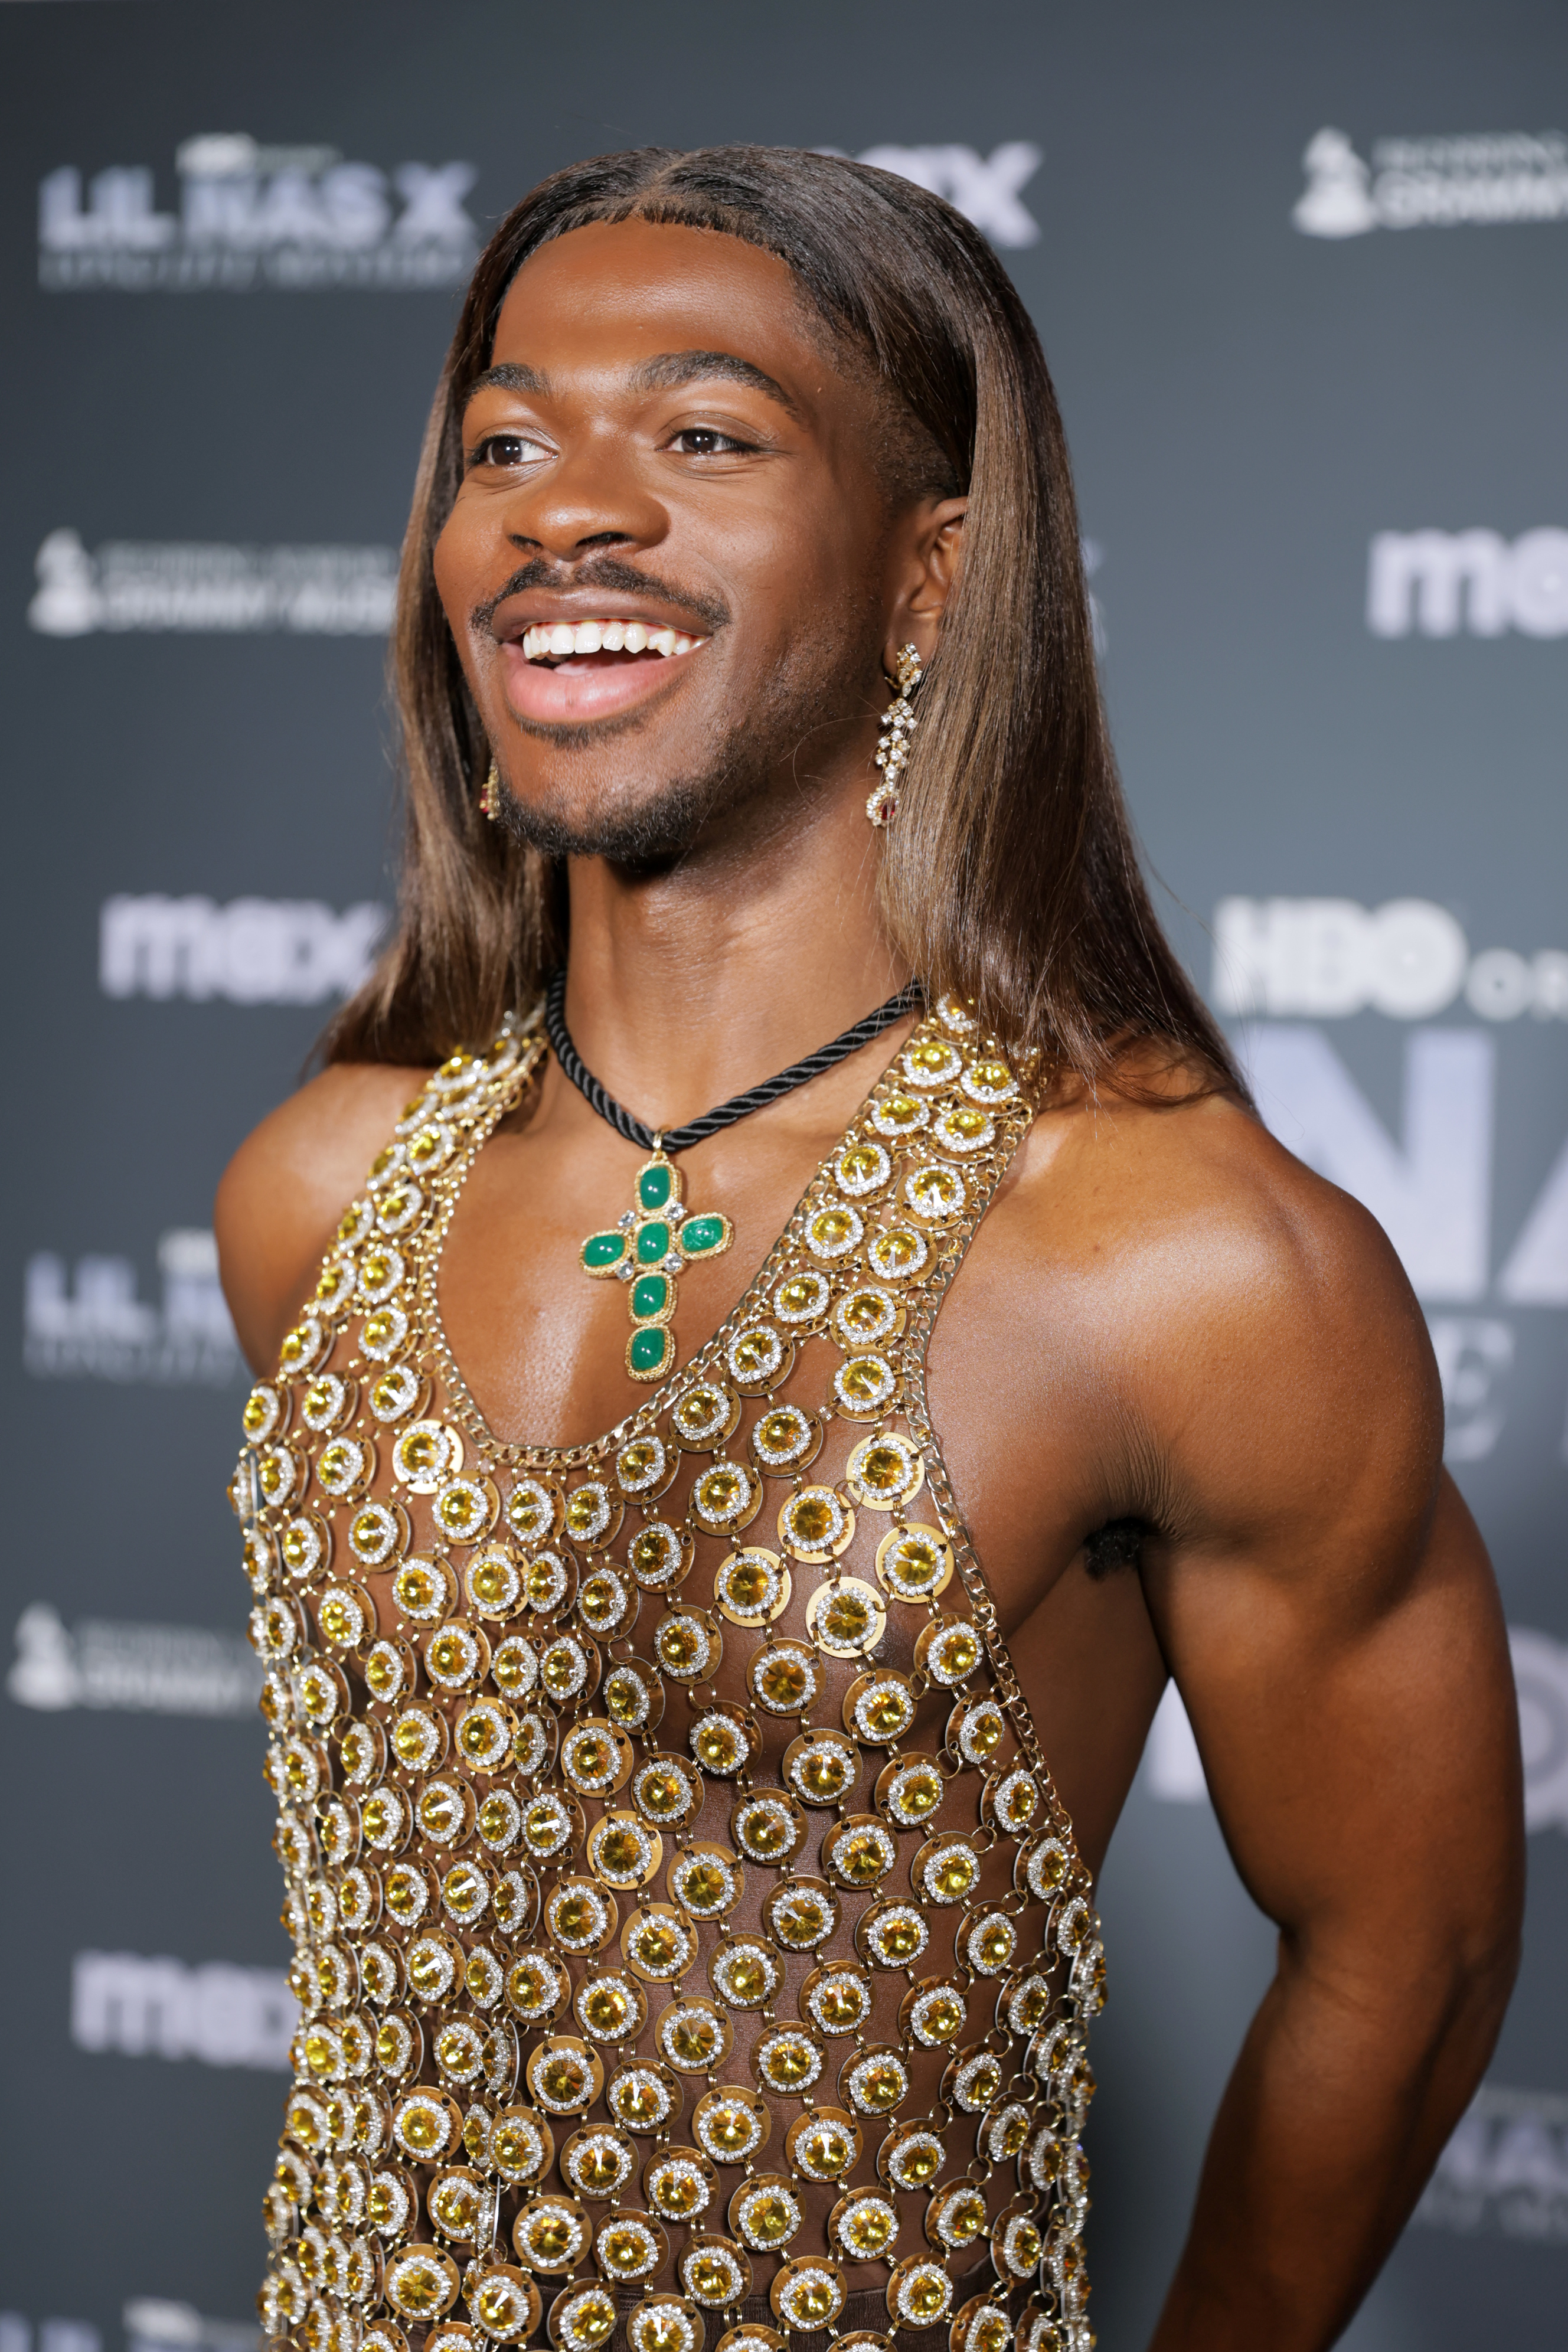 Lil Nas X smiling in an embellished sleeveless outfit with a plunging neckline at an event